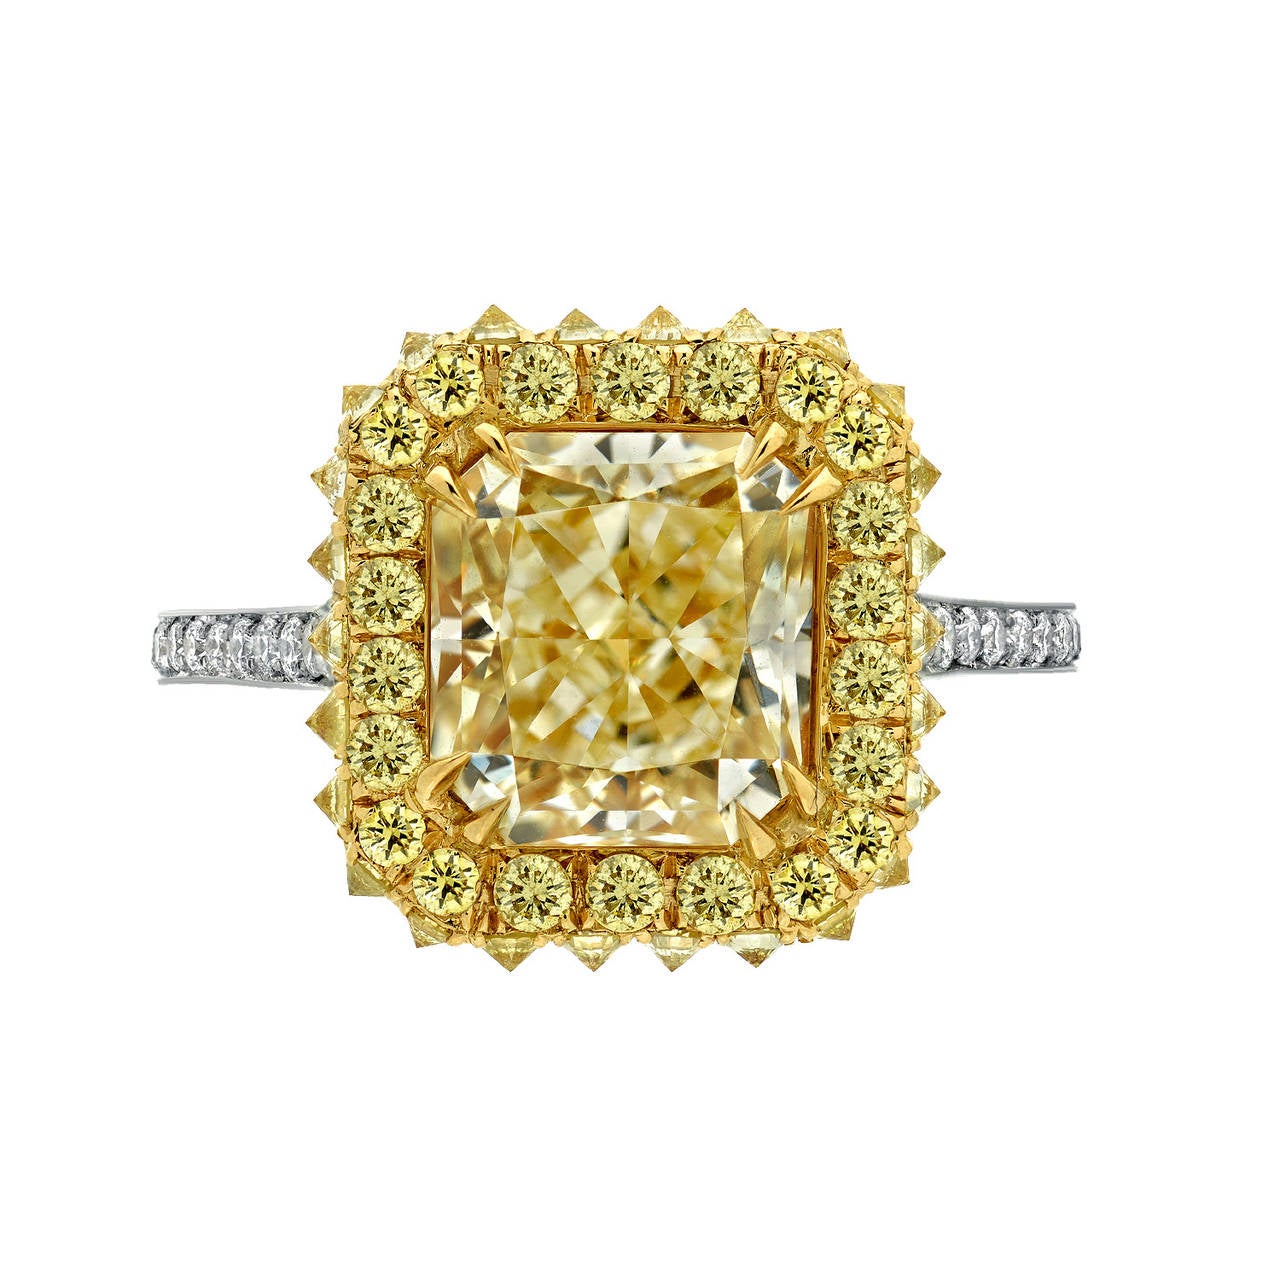 An exceptional and very bright 3.02ct radiant-cut light yellow diamond, VVS2, is surrounded by a row of fancy yellow diamonds on top, and inverted set fancy yellow diamonds on the sides, totaling 0.72ct. The tapered shank is gradually set with round